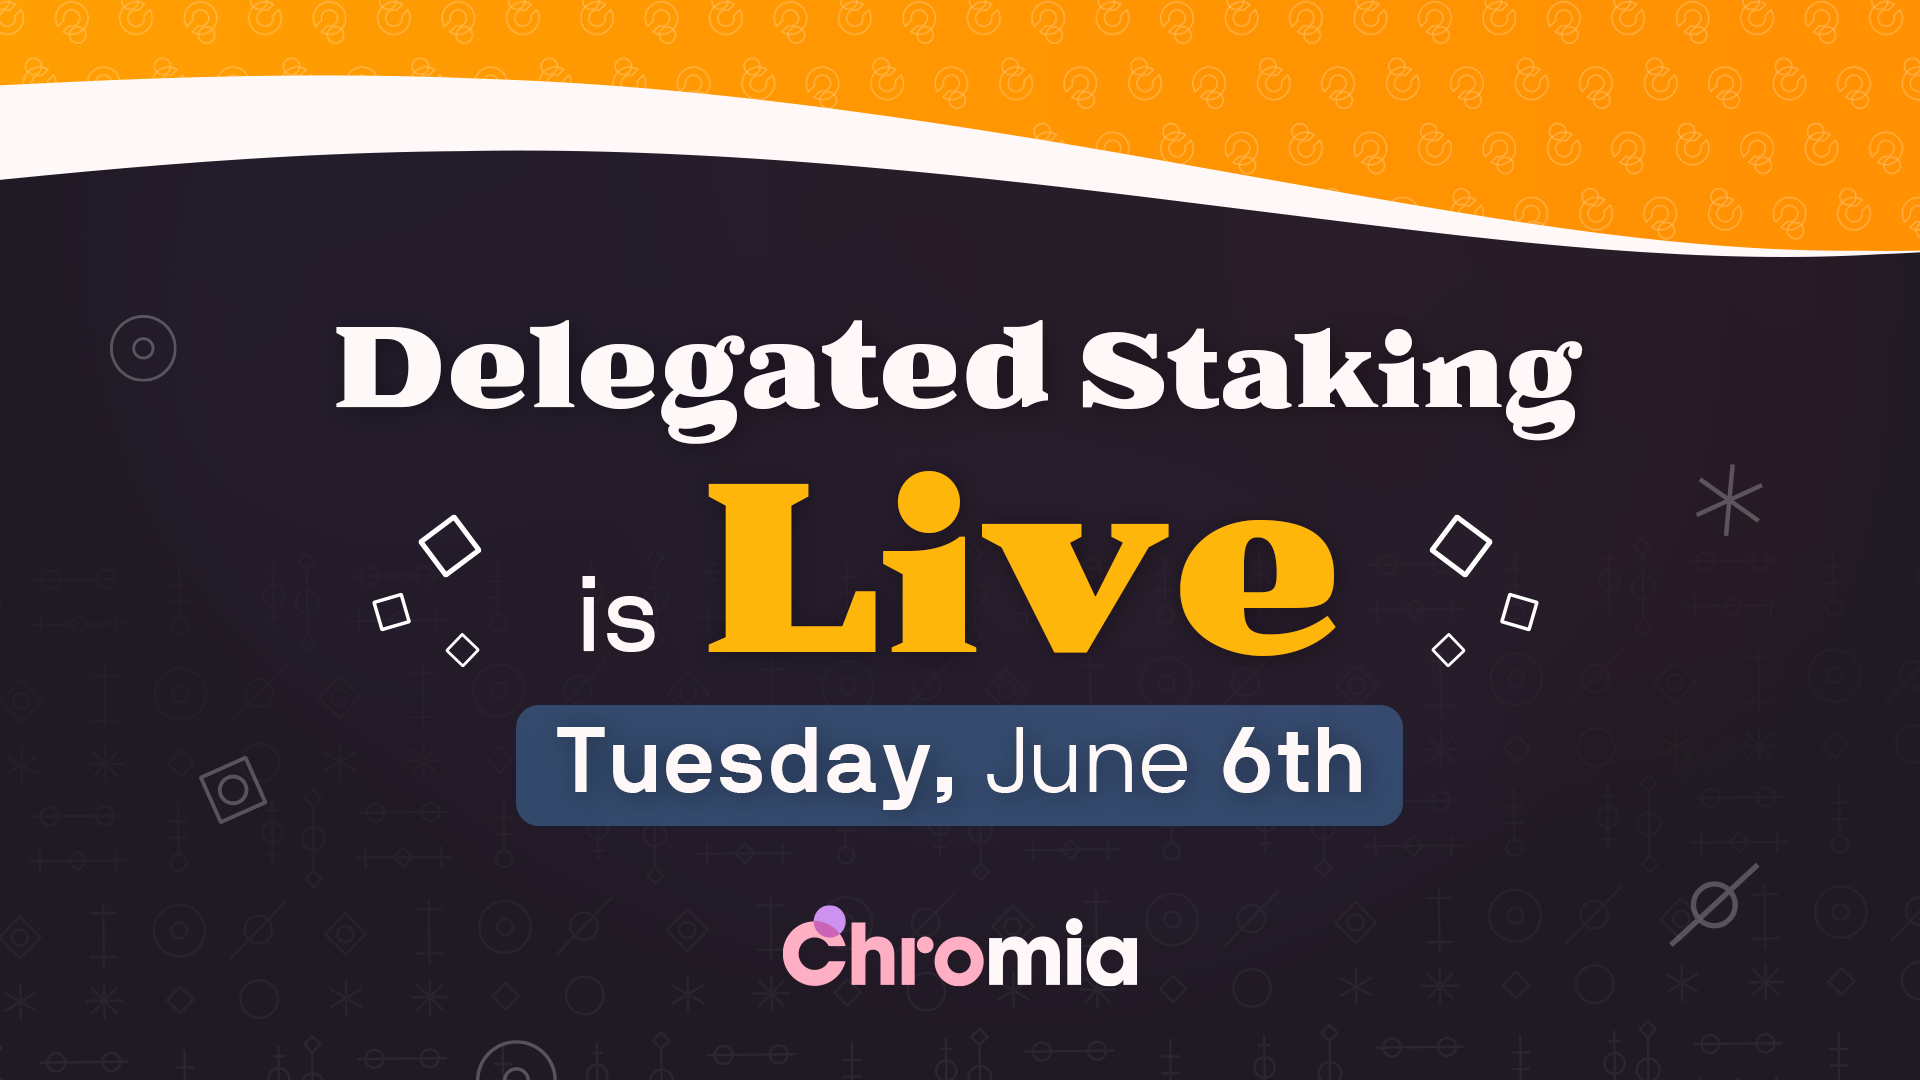 Delegated Staking is Live!